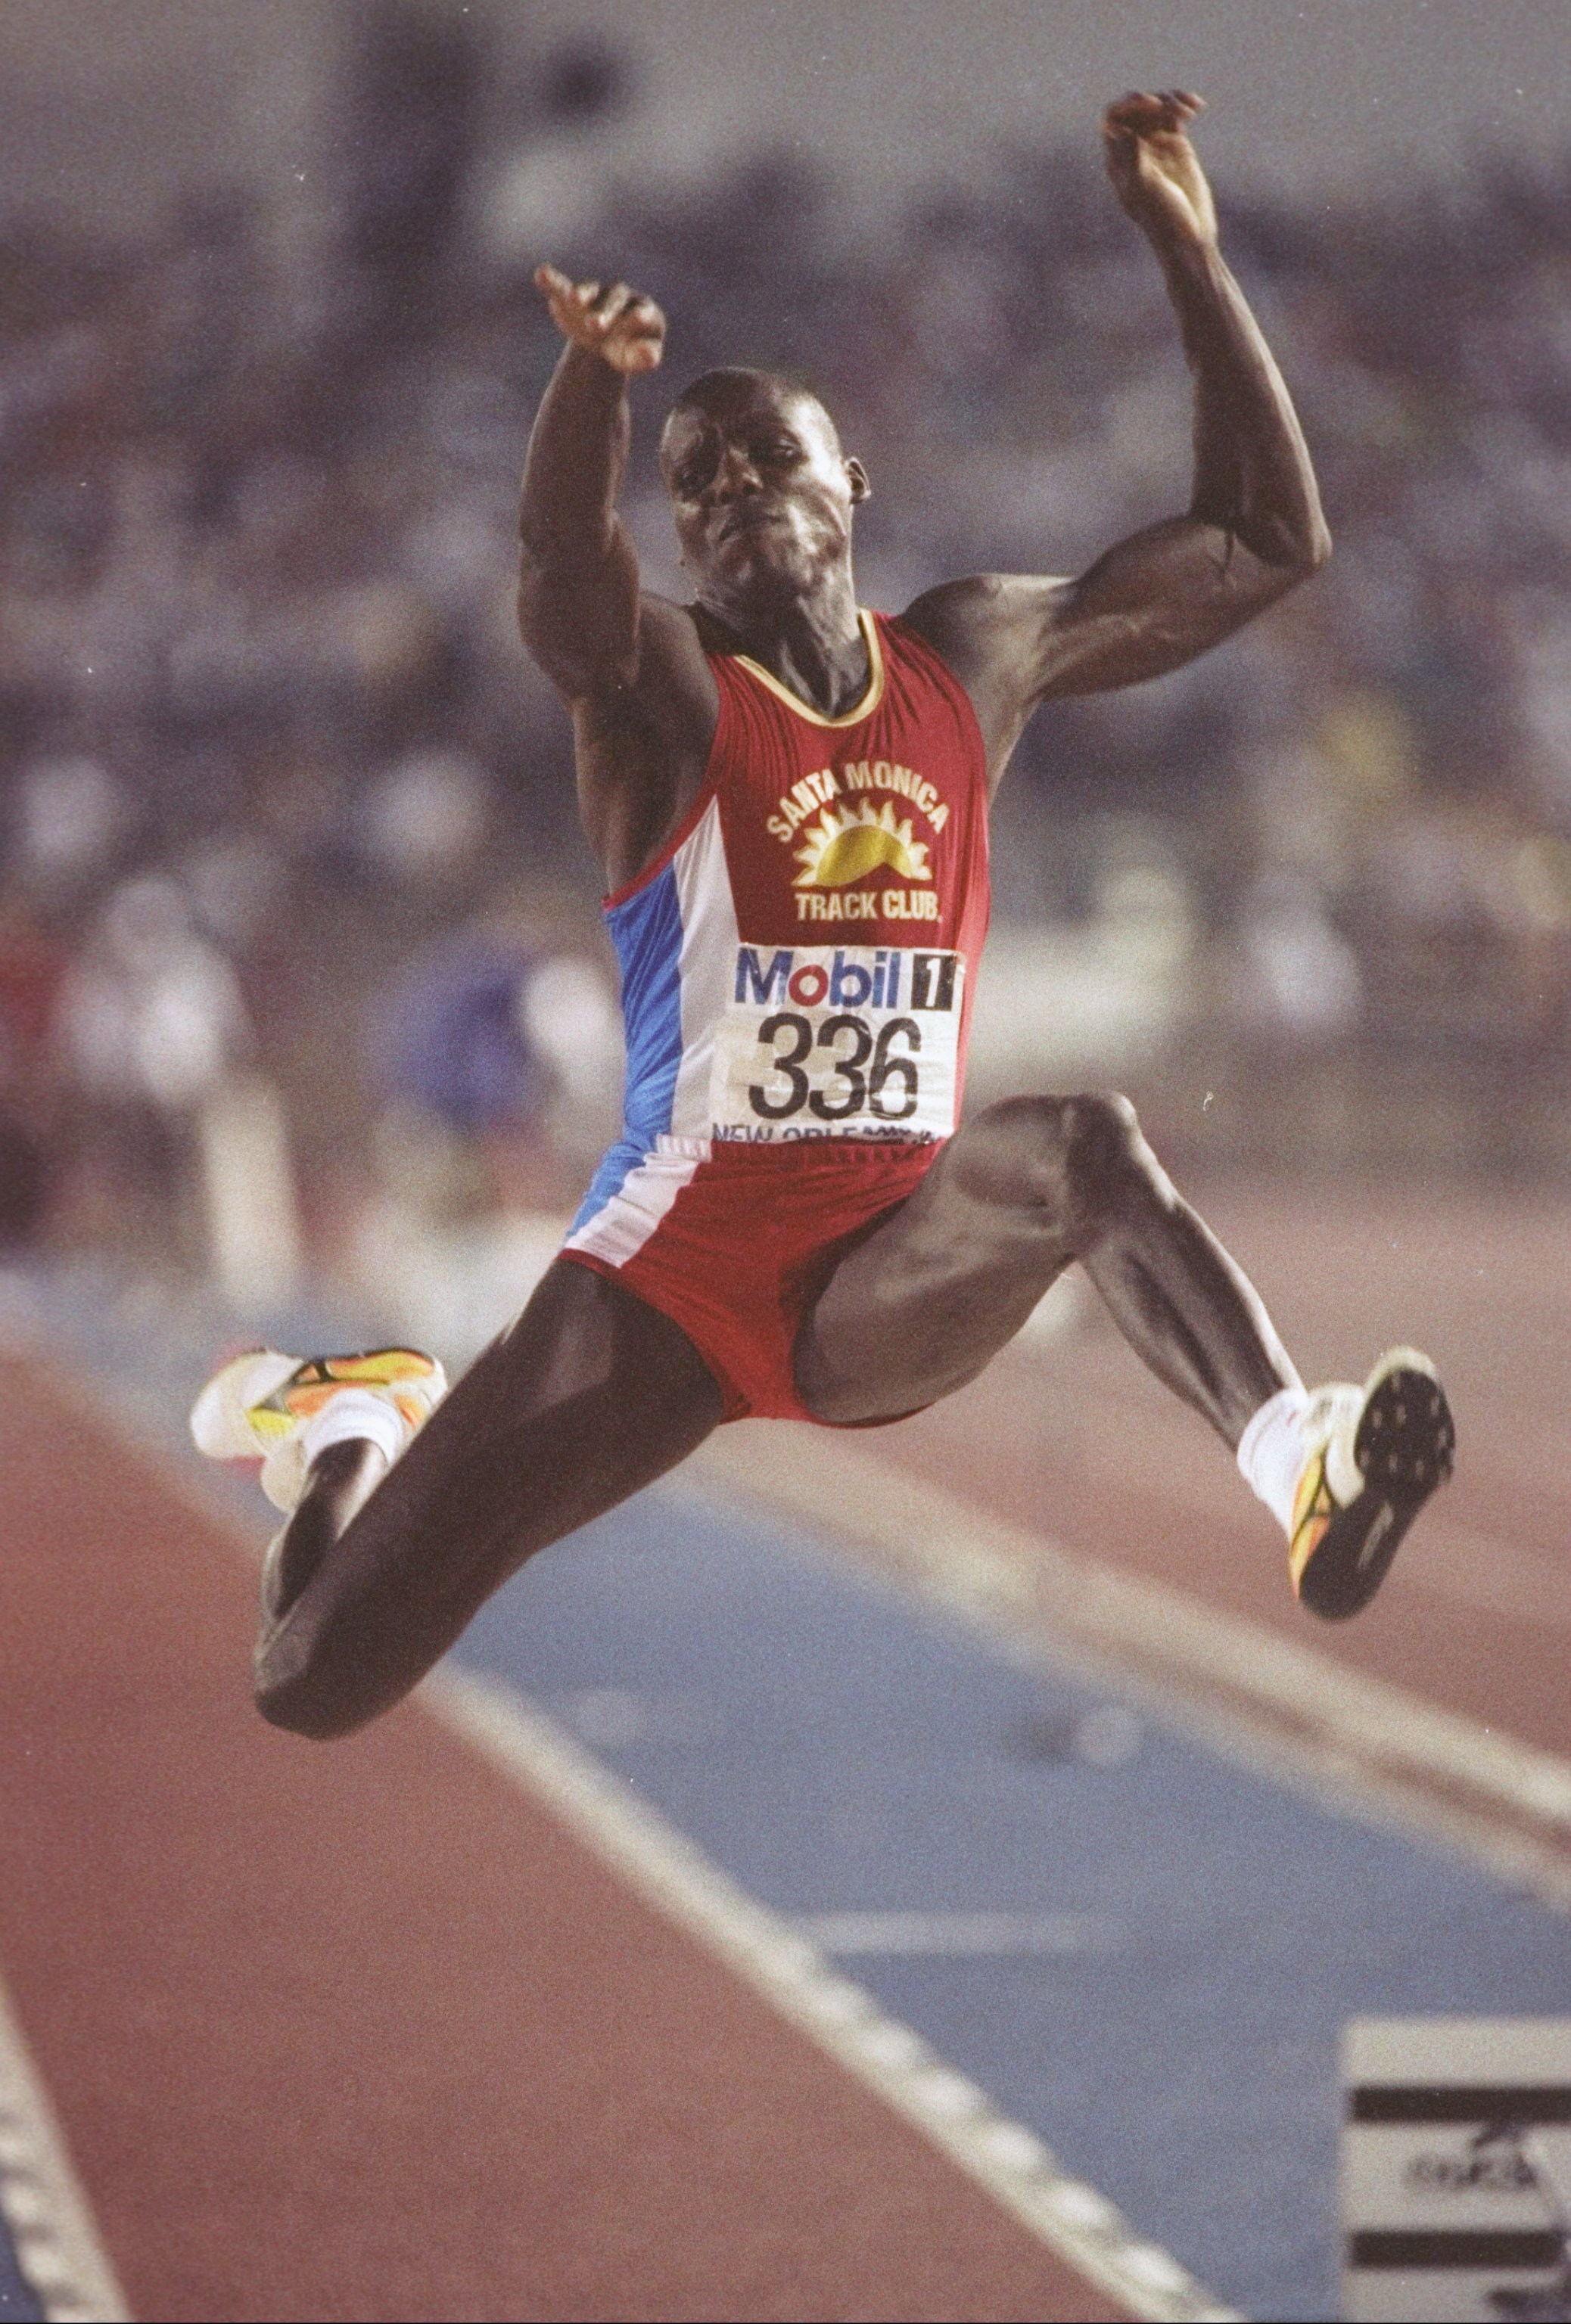 1992:  Carl Lewis is stretching his long jump at the U.S. Track and Field Trials in New Orleans, Louisiana. Mandatory Credit: Tony Duffy  /Allsport